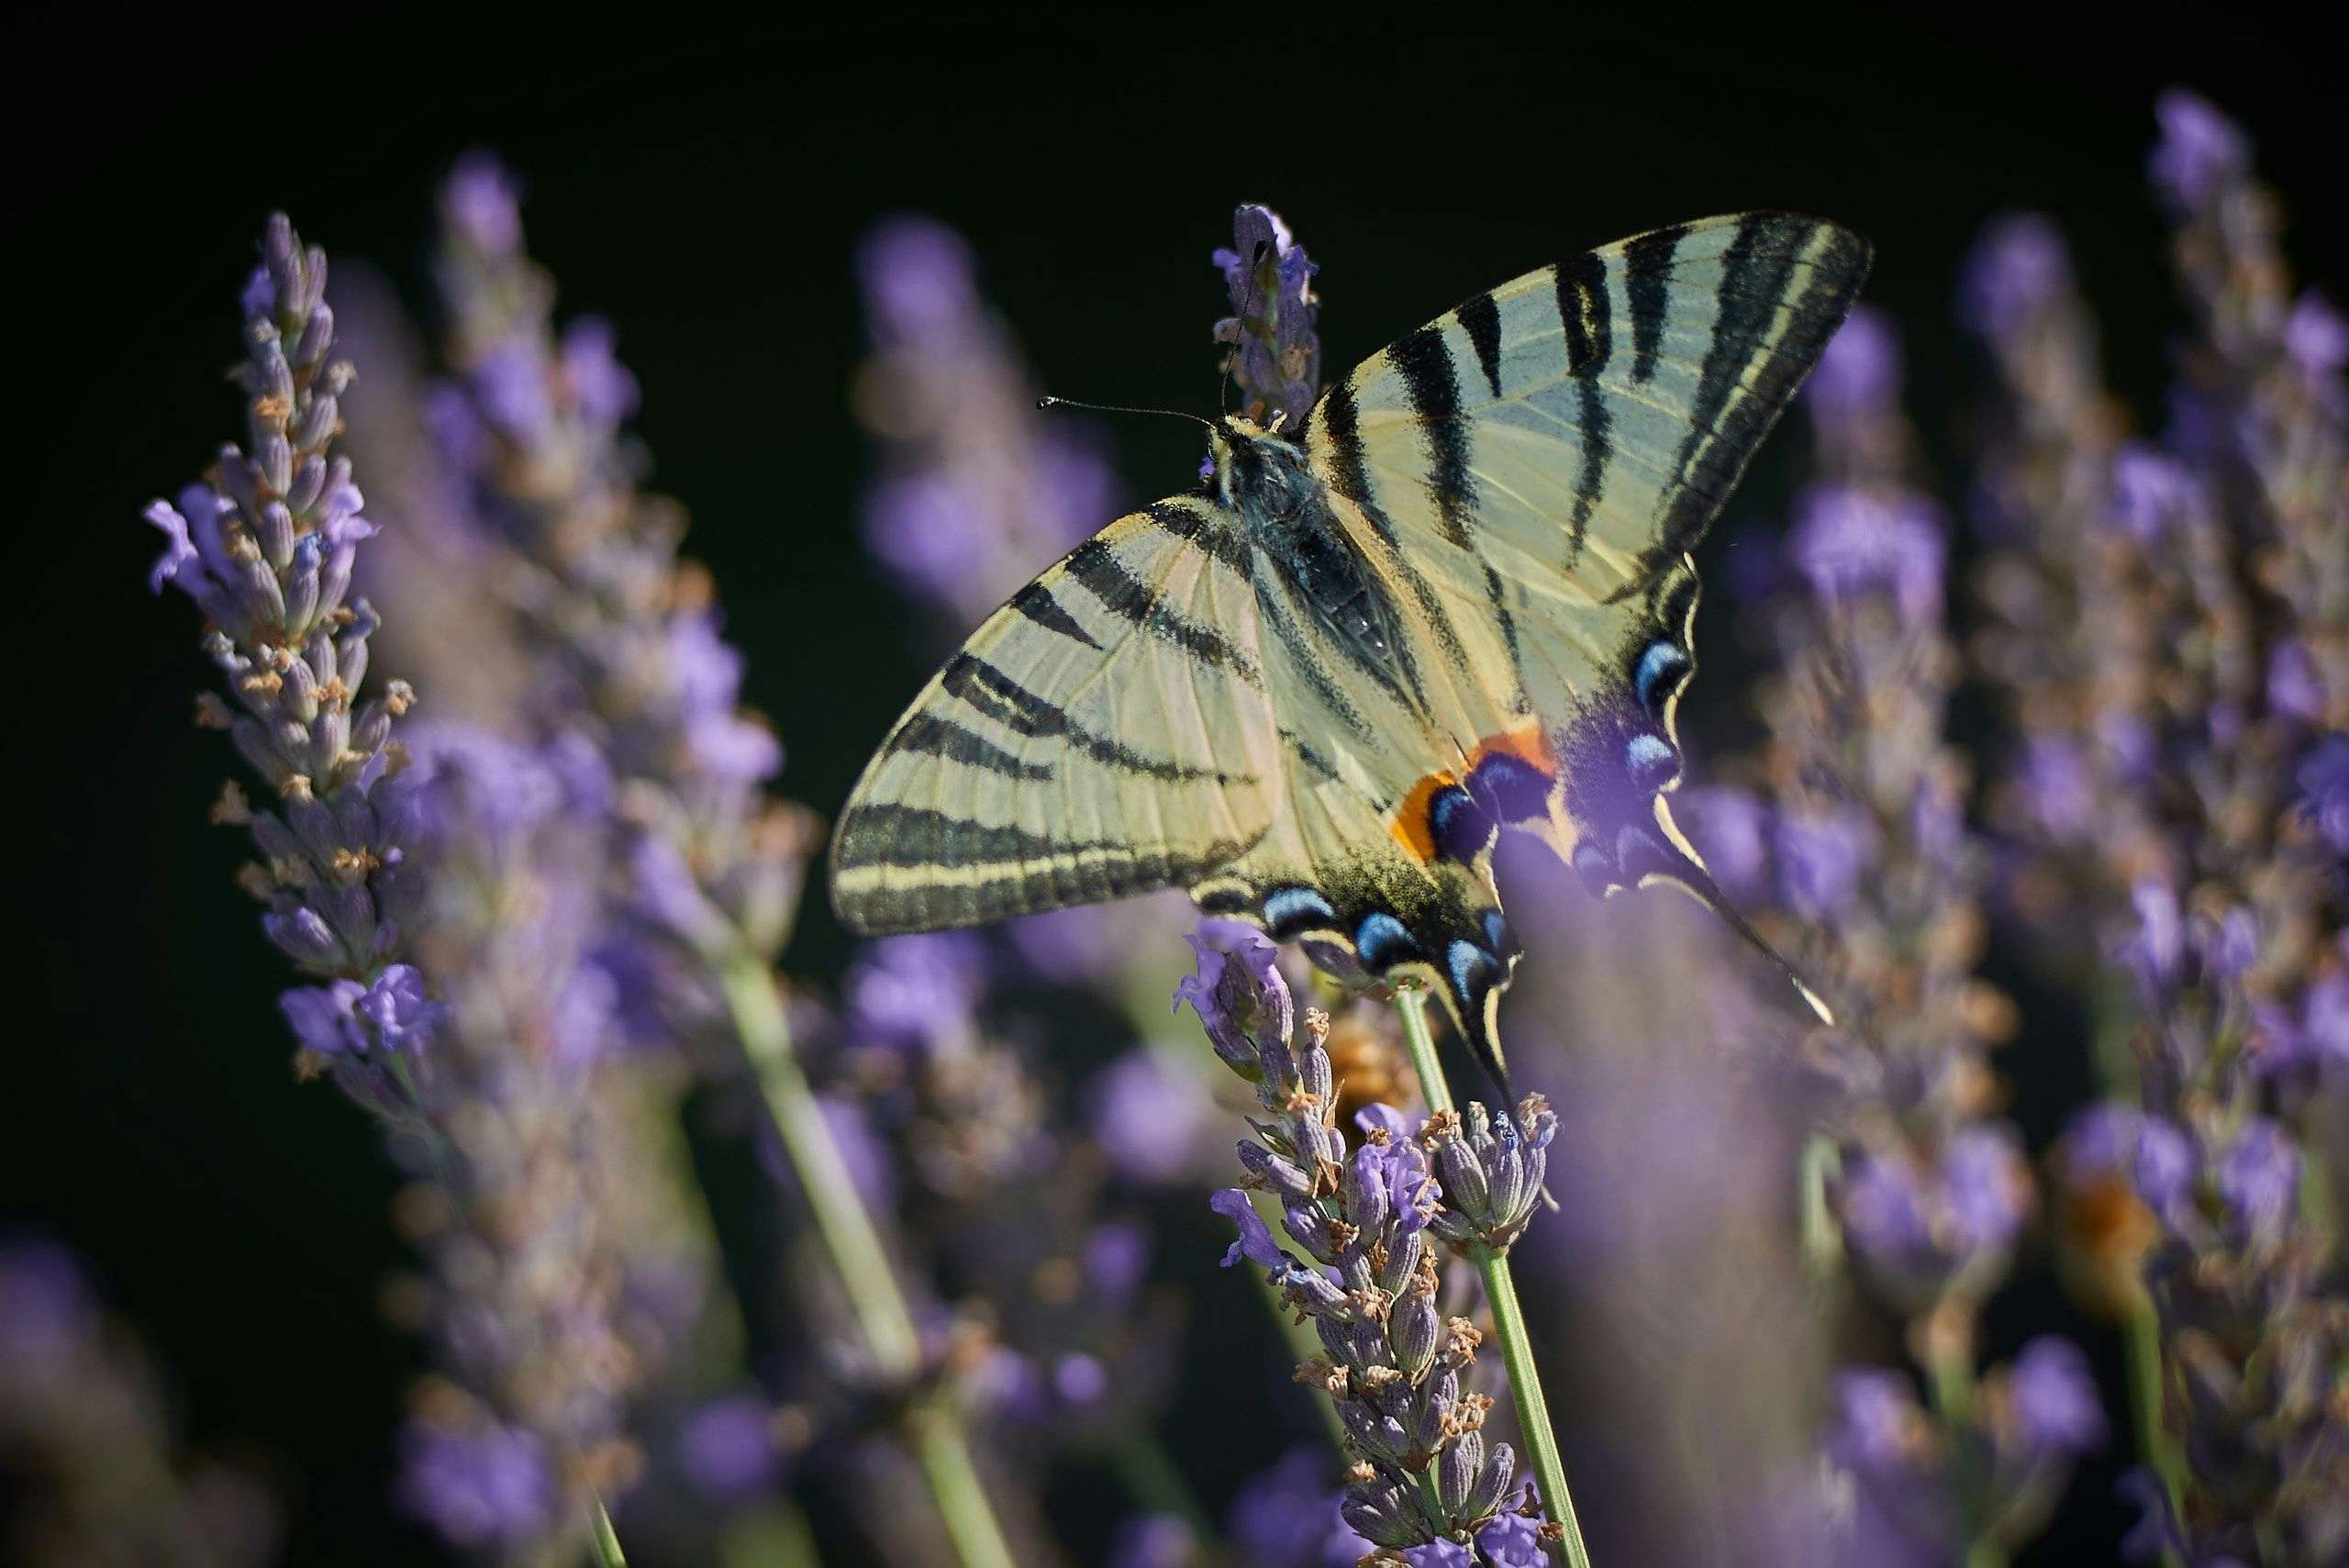 Scarce swallowtail butterfly feeding on lavender. Photography by Xavier Wendling.